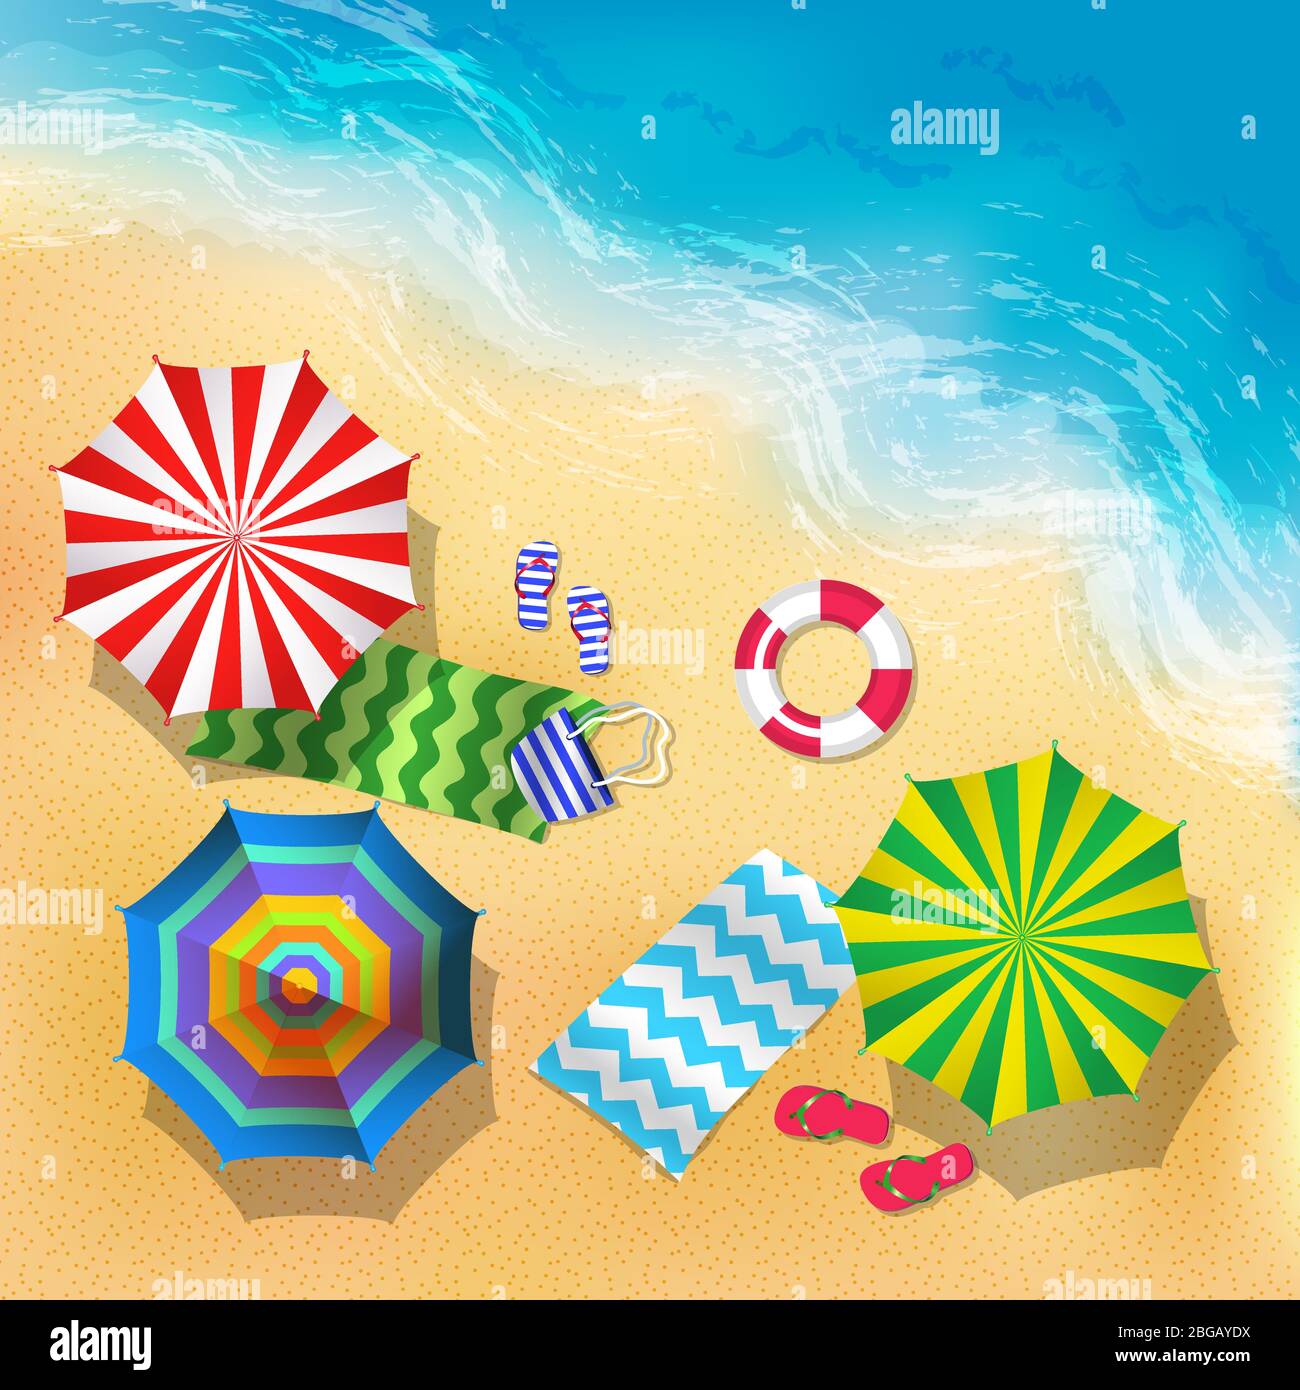 Top view vector illustration of beach, sand and umbrella. Summer background Stock Vector